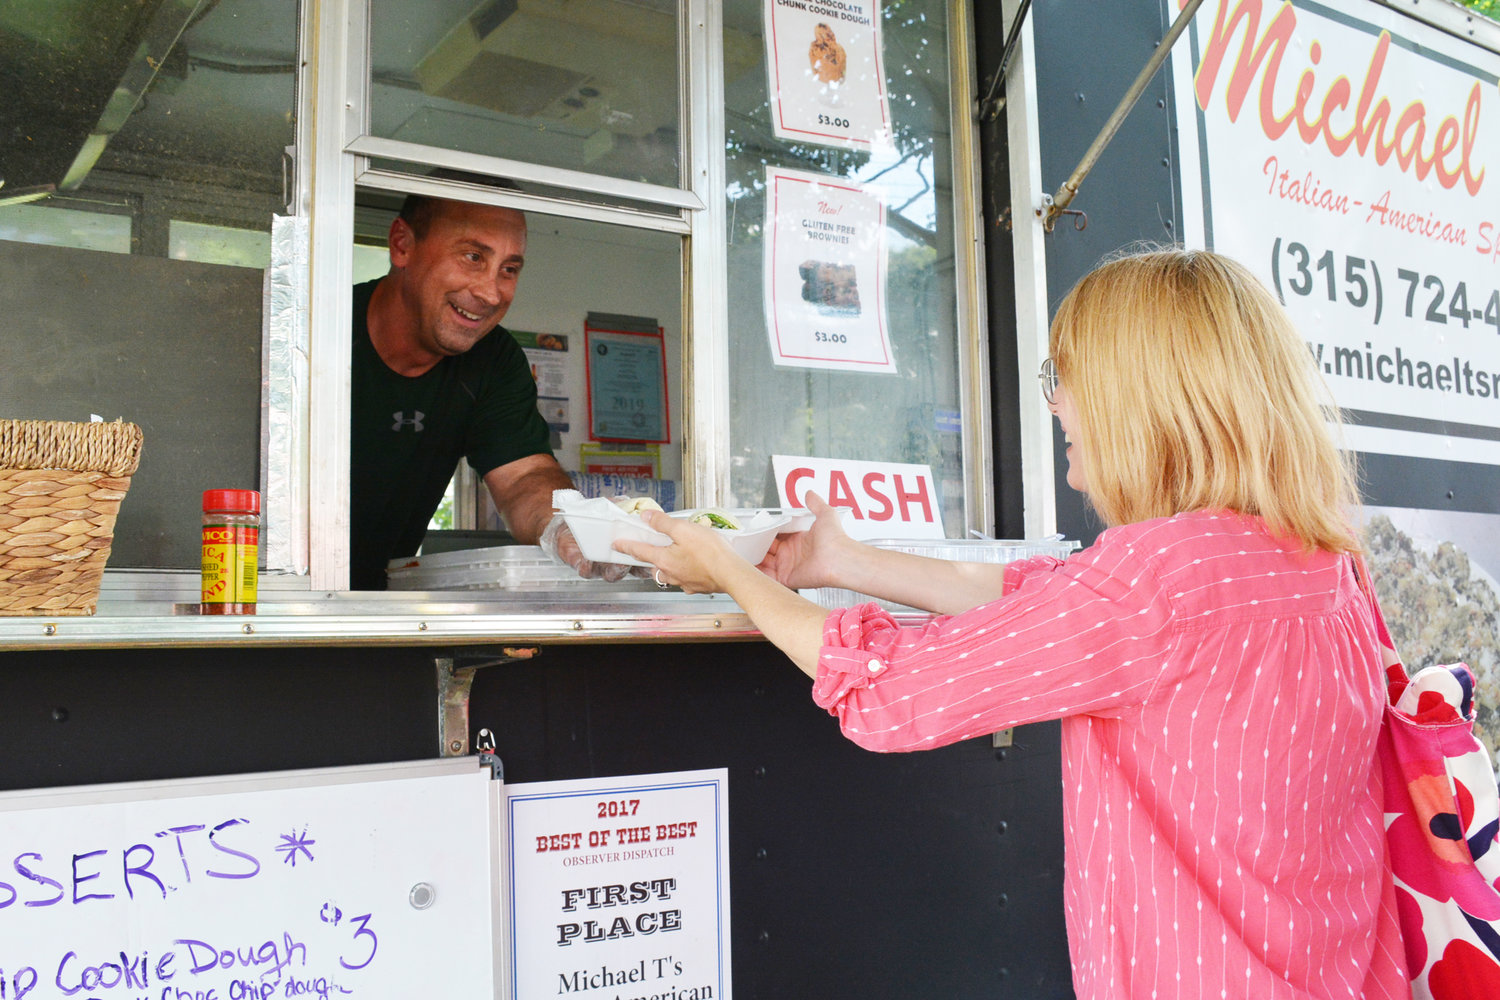 GREENS TO GO — Michael Trunfio, owner of Michael T’s food truck hands customer Nicolle Child an order at the Farmer’s Market on the Clinton Green, Thursday, Aug. 8. The Clinton resident has been operating the food truck in the village market for the past three years, but said this is his busiest year to date.